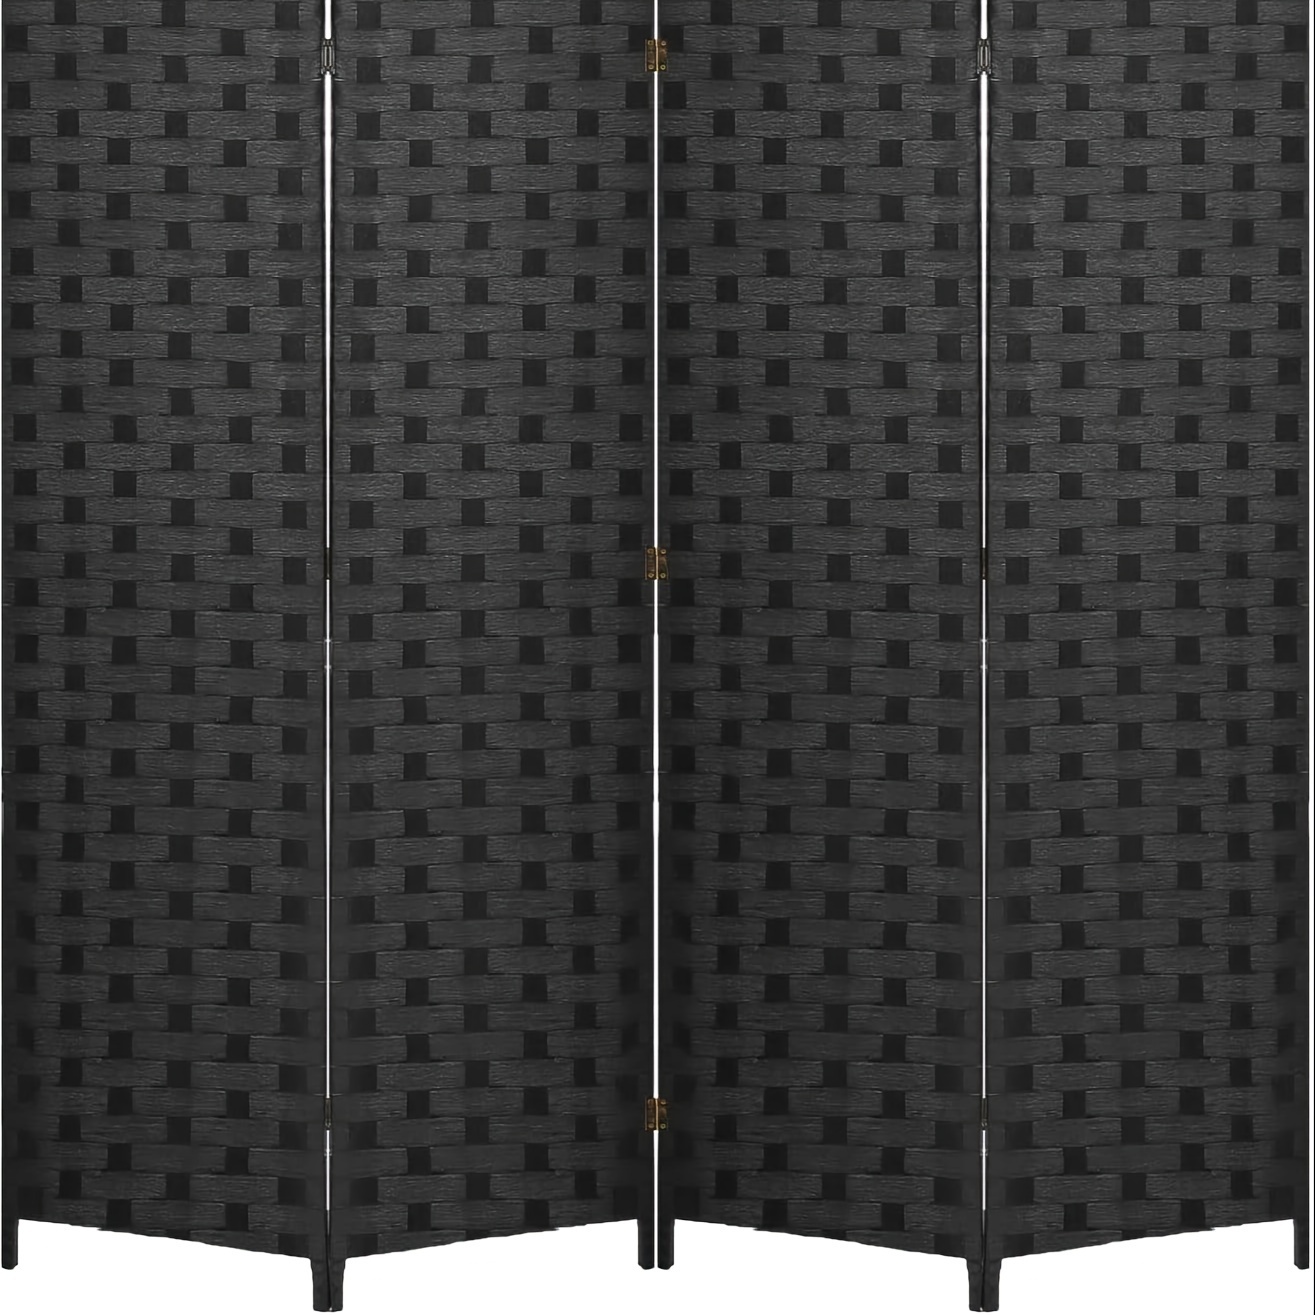 

Room Divider Wall 4 Panels Indoor Handmade Wood Portable Room Dividers And Folding Privacy Screens Used In Multiple Occasions Decorate And Beautify Space